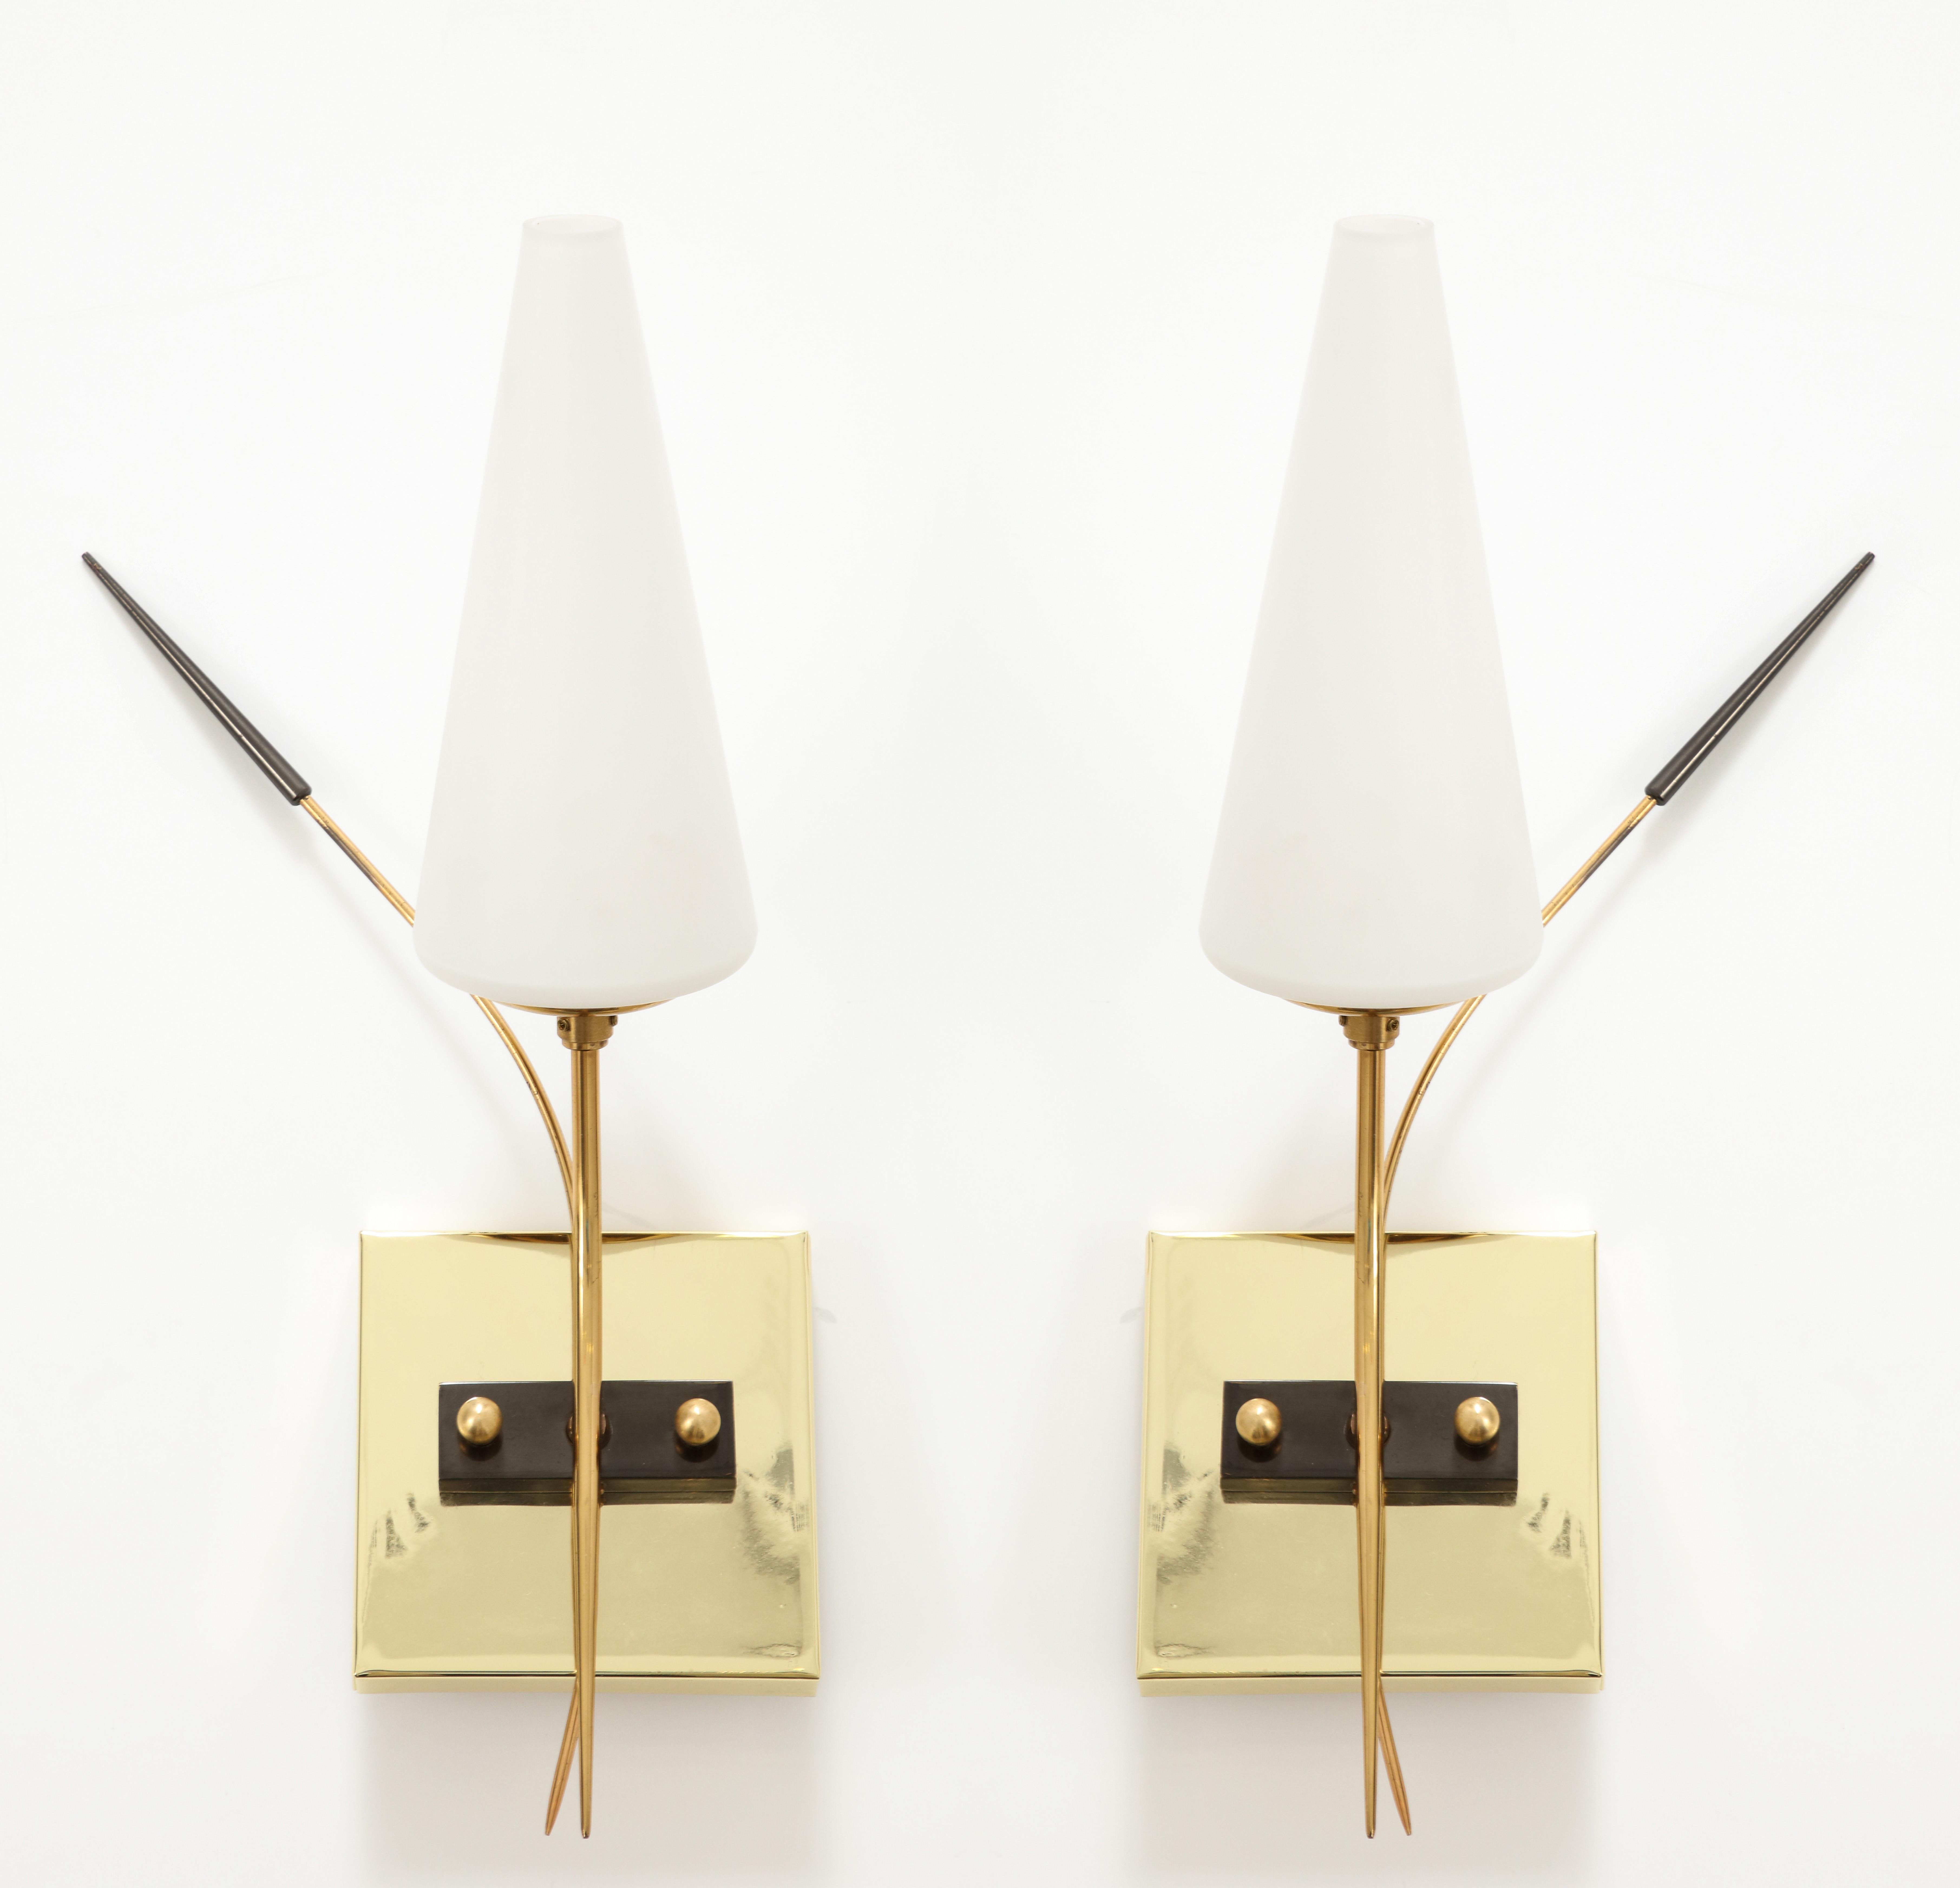 Pair of 1950's Brass and Opaline Glass sconces by Lunel.
The sconces have been newly rewired for the US with a candelabra socket that takes up to 40 Watts.